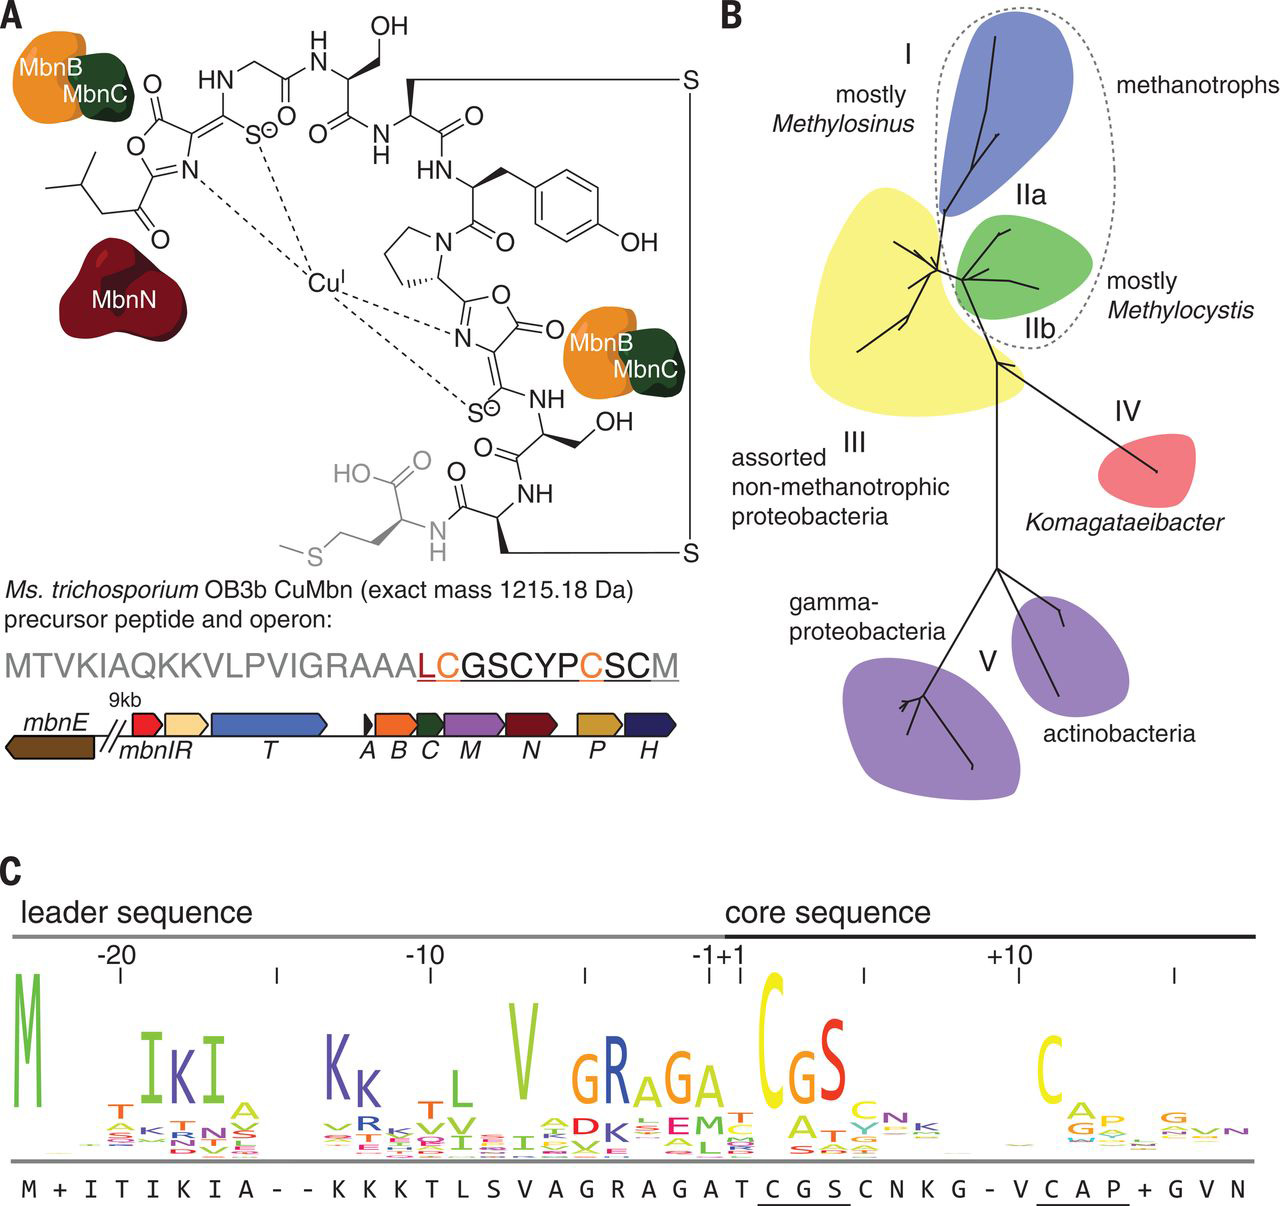 Mbn structure, operon organization, phylogeny, and precursor peptide sequence